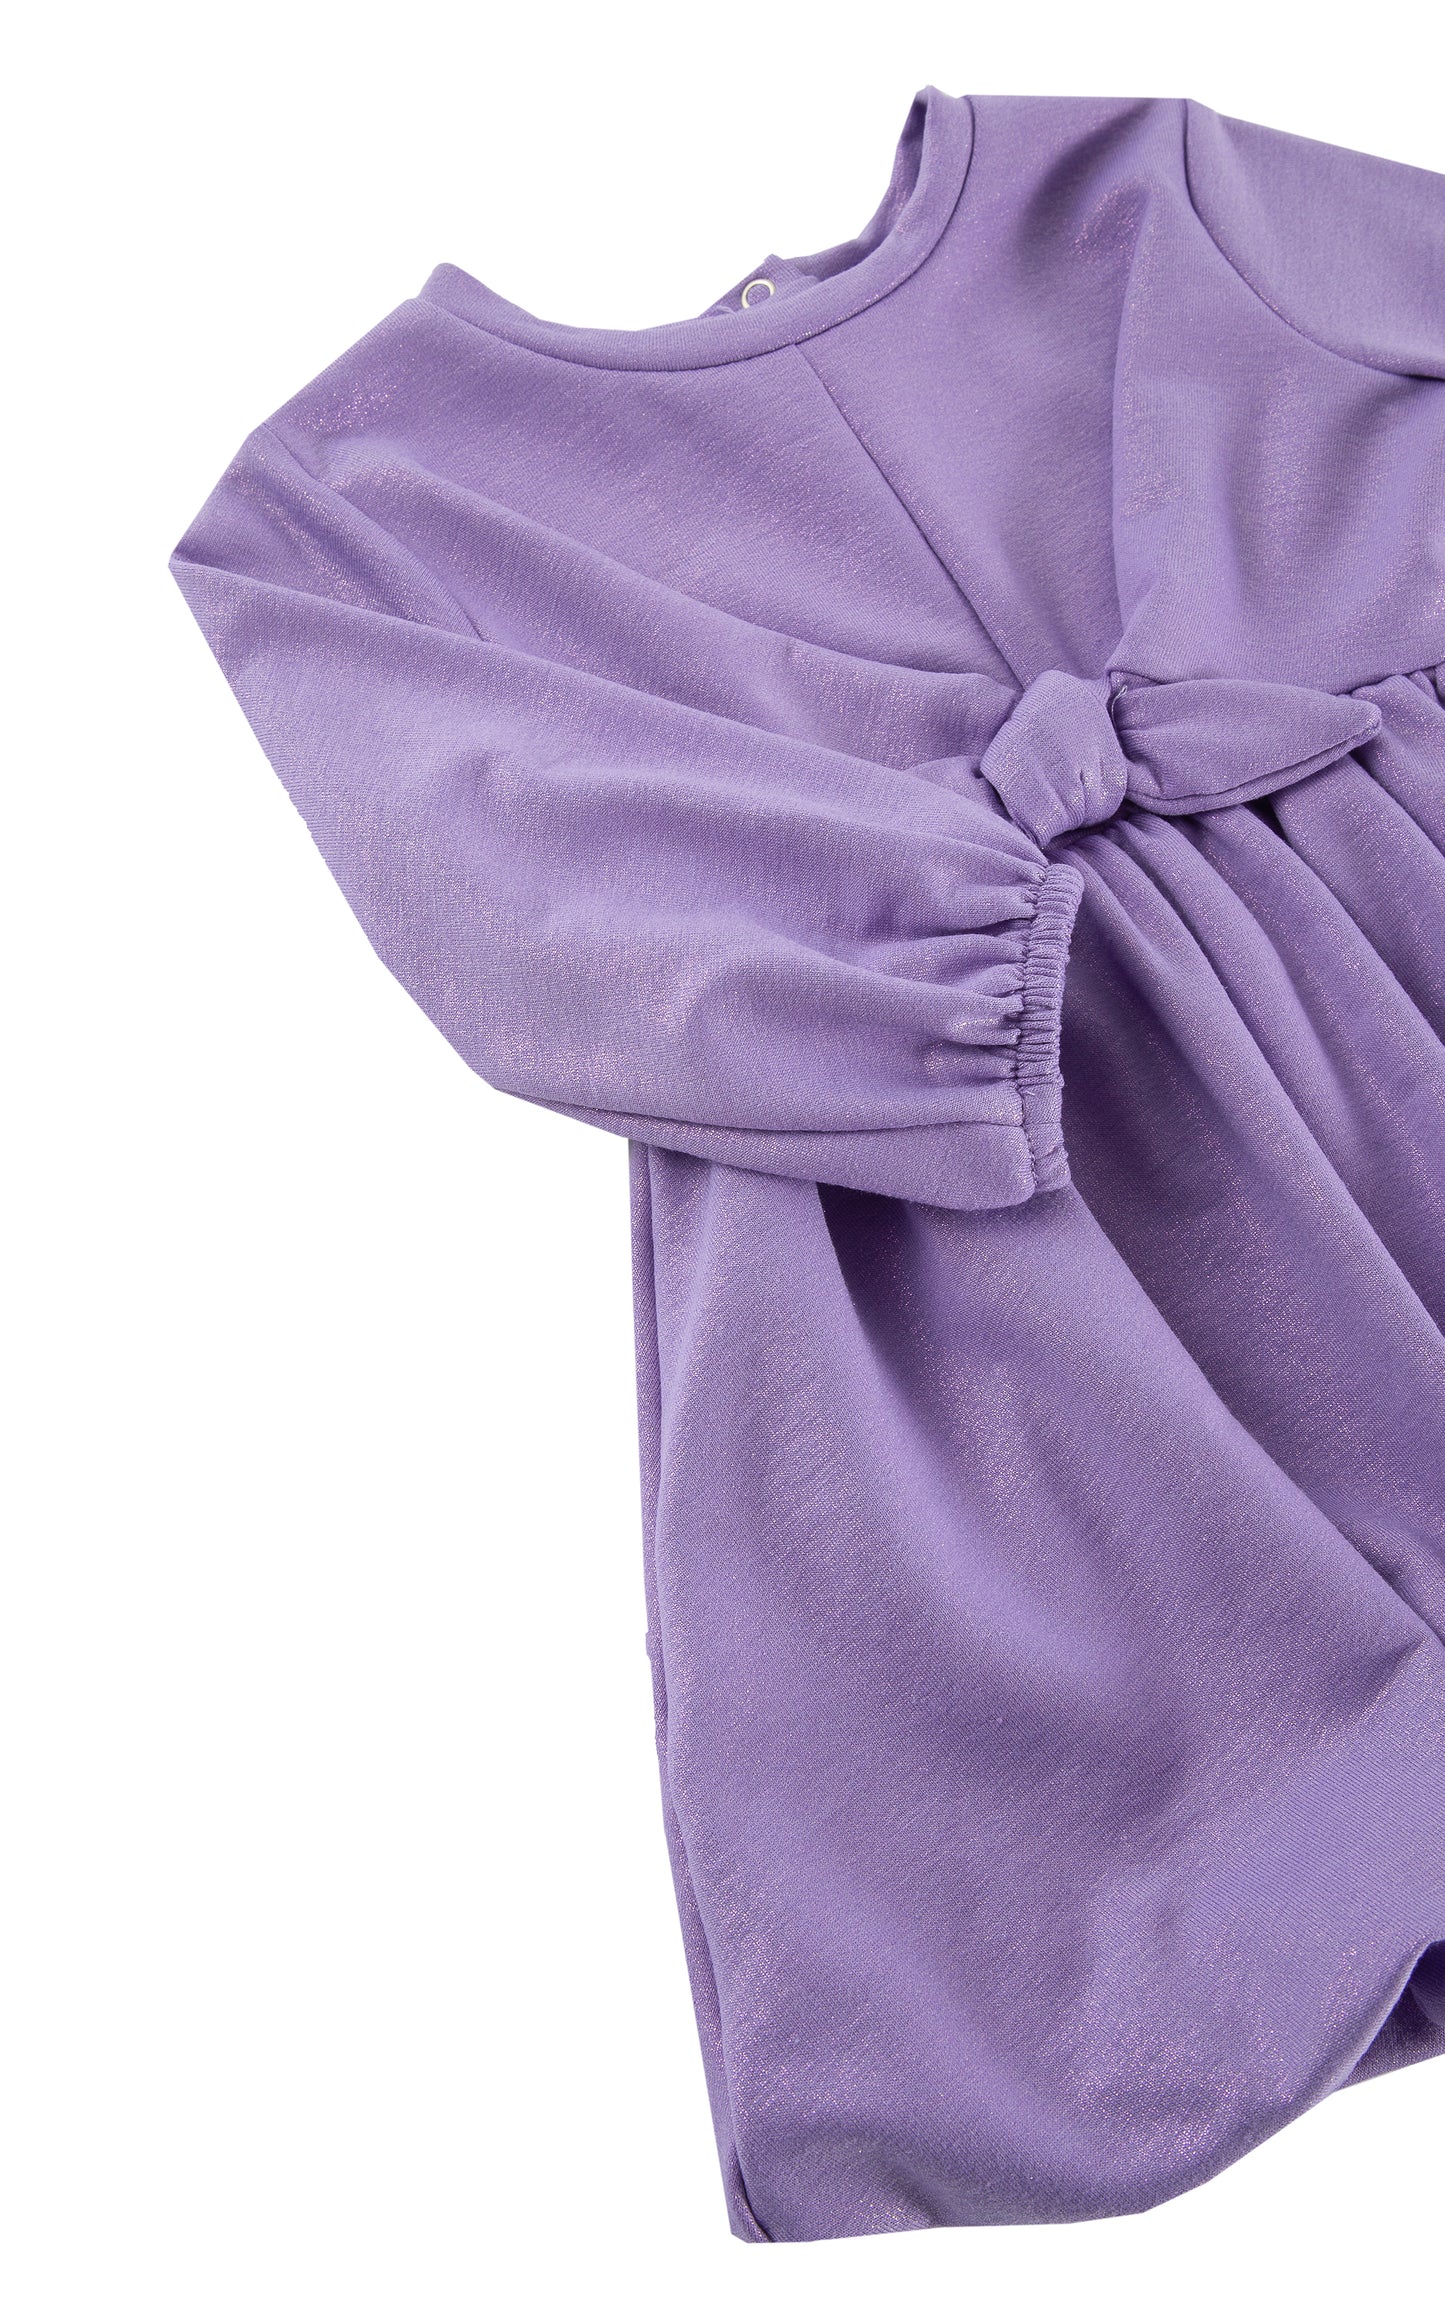 CLOSE UP OF METALLIC PURPLE BUBBLE DRESS WITH BOW